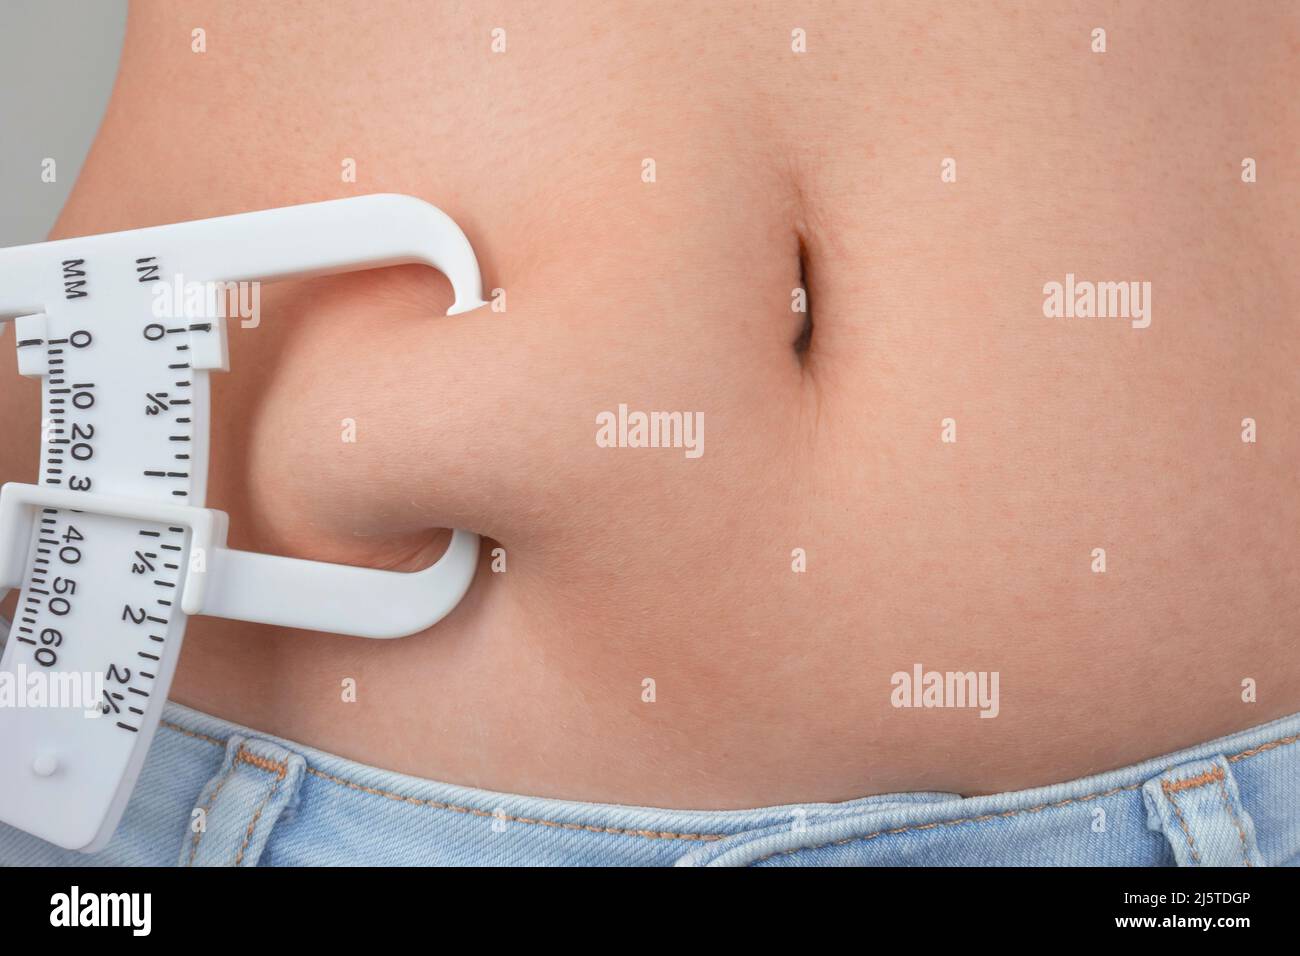 https://c8.alamy.com/comp/2J5TDGP/measuring-normal-30-percent-fat-layer-of-slightly-overweight-woman-with-caliper-close-up-weight-loss-and-diet-concept-medical-treatment-of-obesity-2J5TDGP.jpg